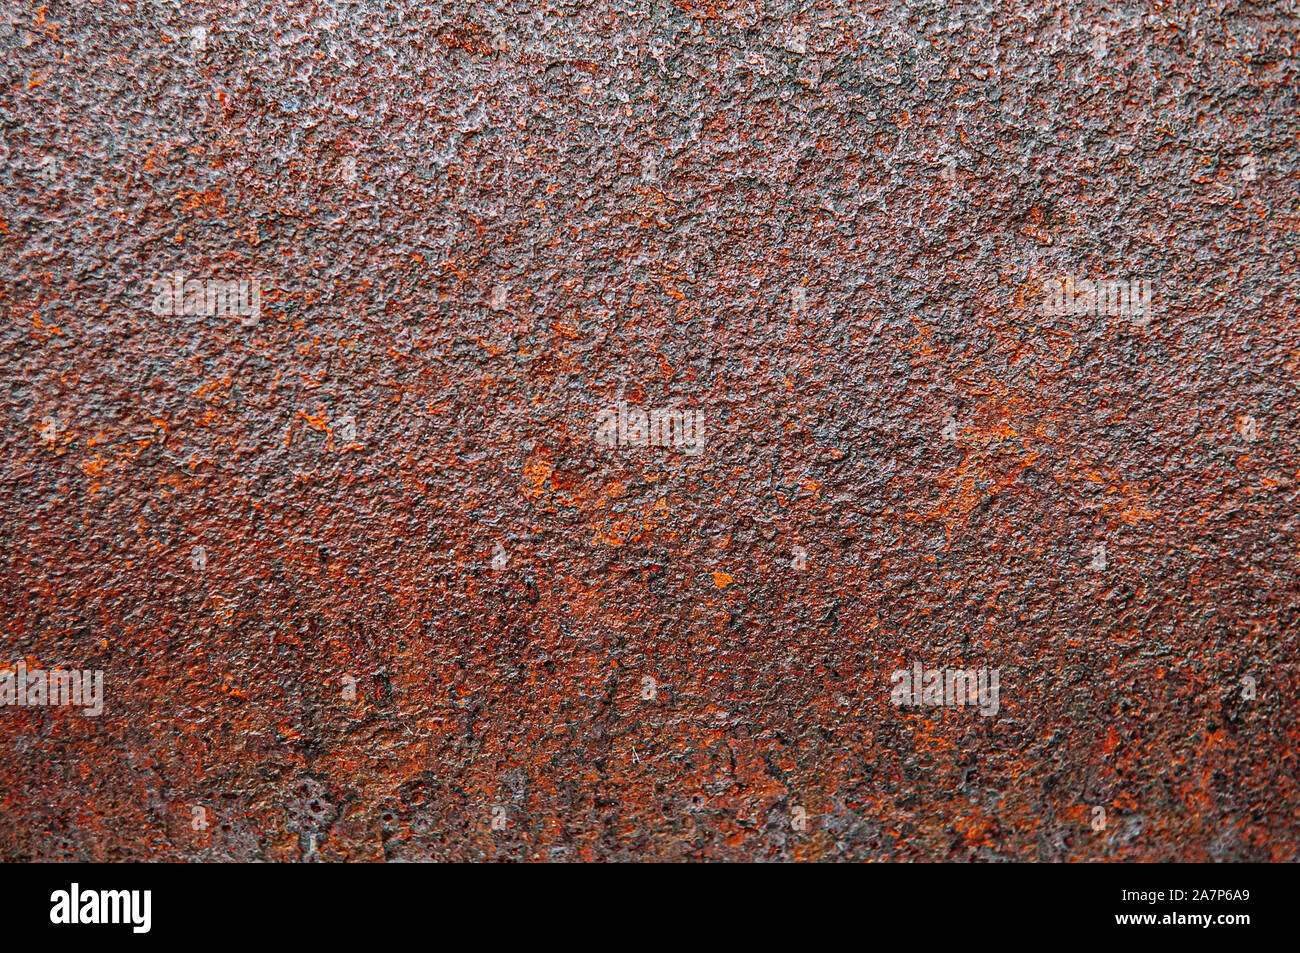 Rusted dirty decay metal texture damage iron surface background Stock Photo